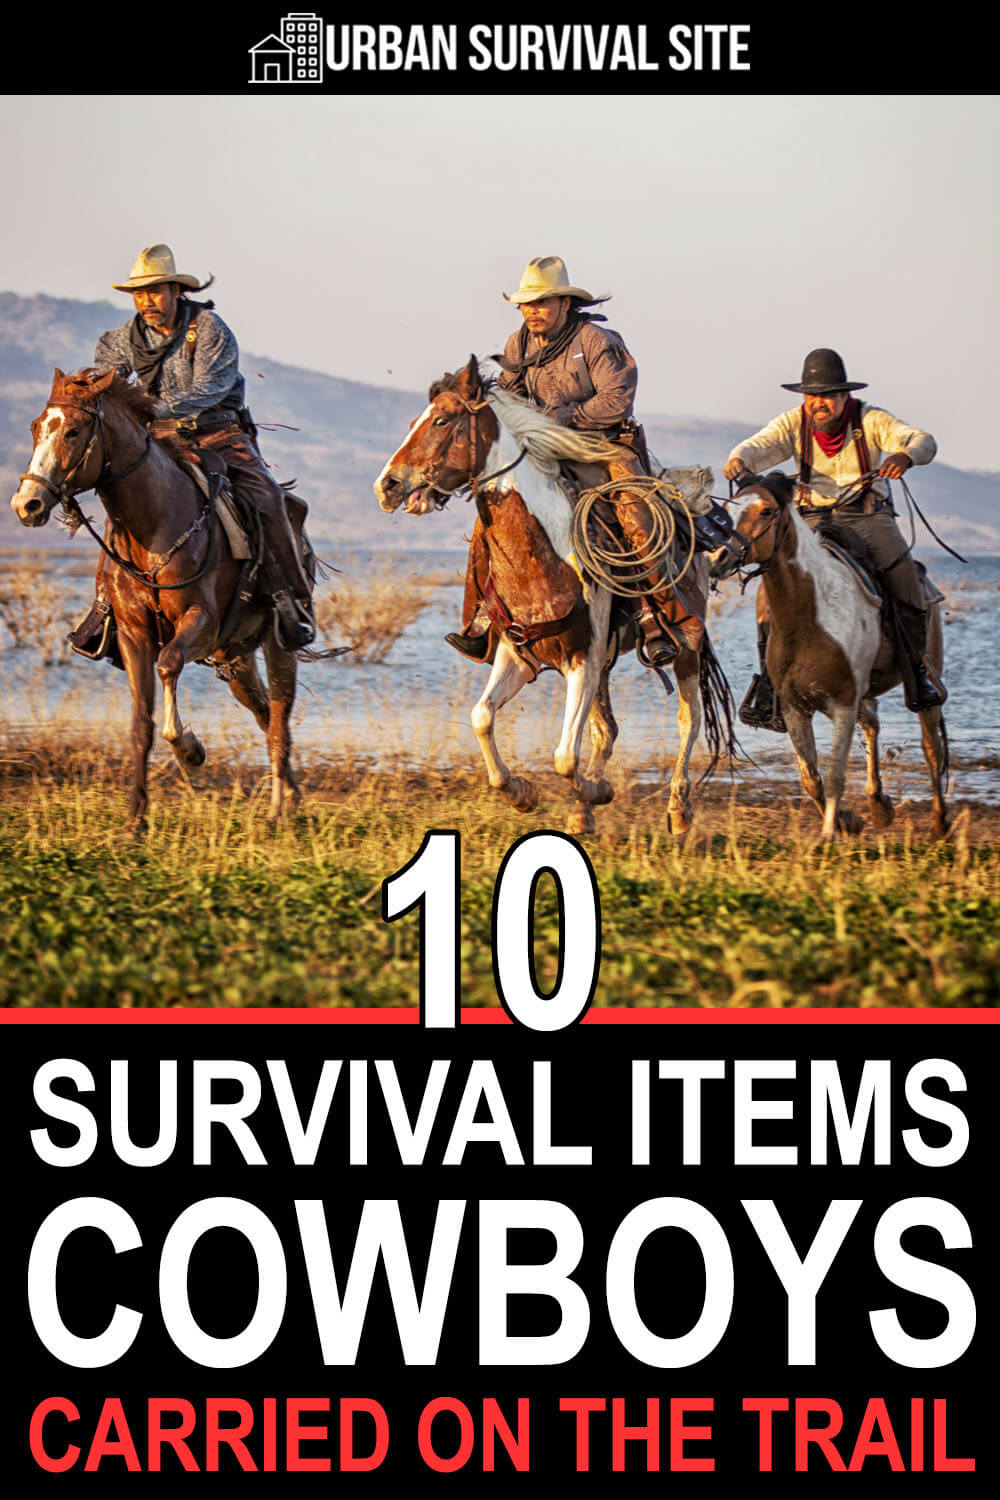 10 Survival Items Cowboys Carried On The Trail